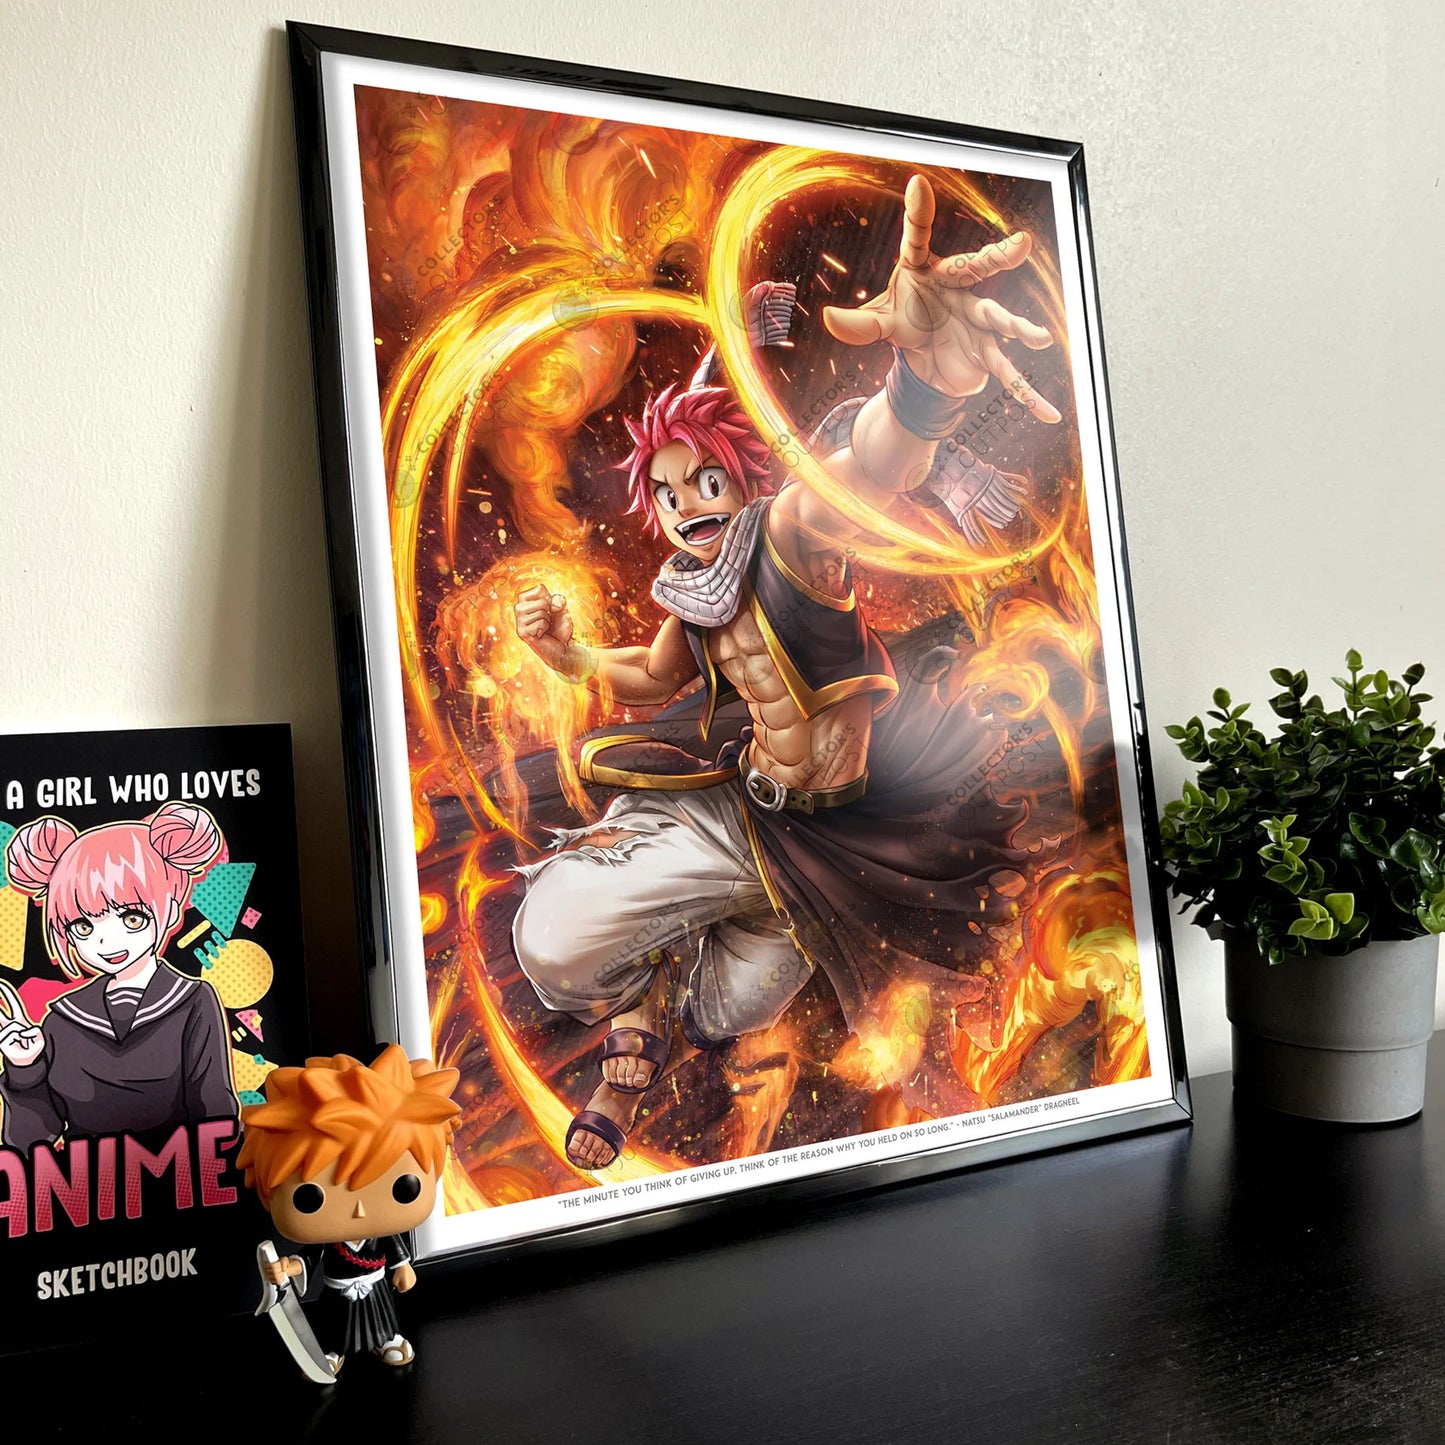 Fairy Tail Anime Natsu Dragneel Paint By Numbers - PBN Canvas